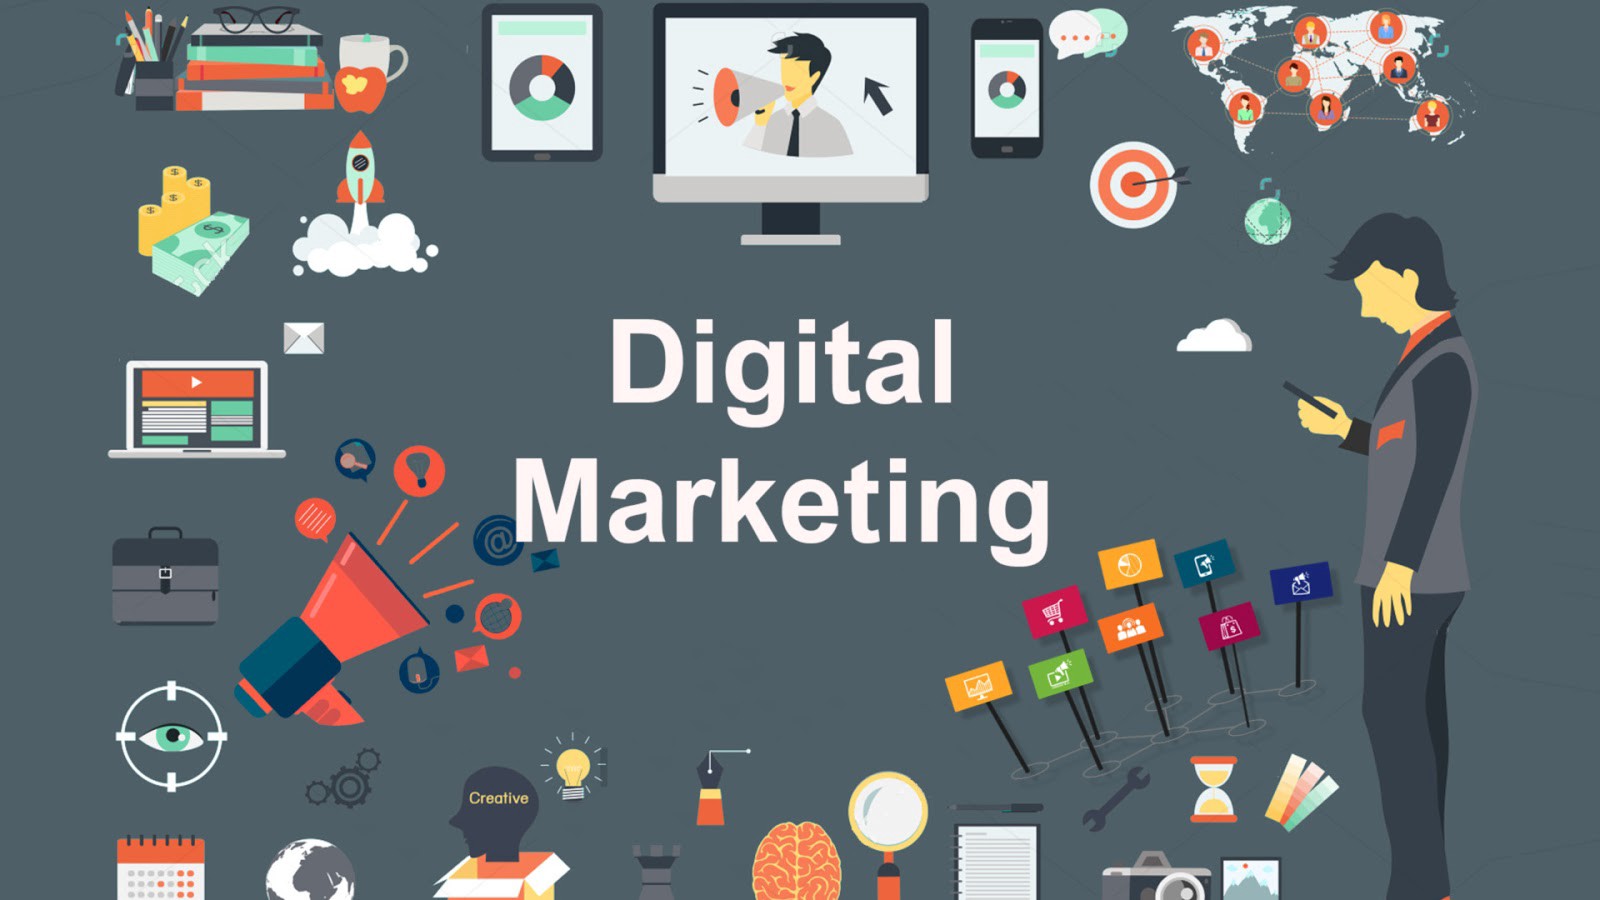 Why Digital Marketing Is Important for Every Business